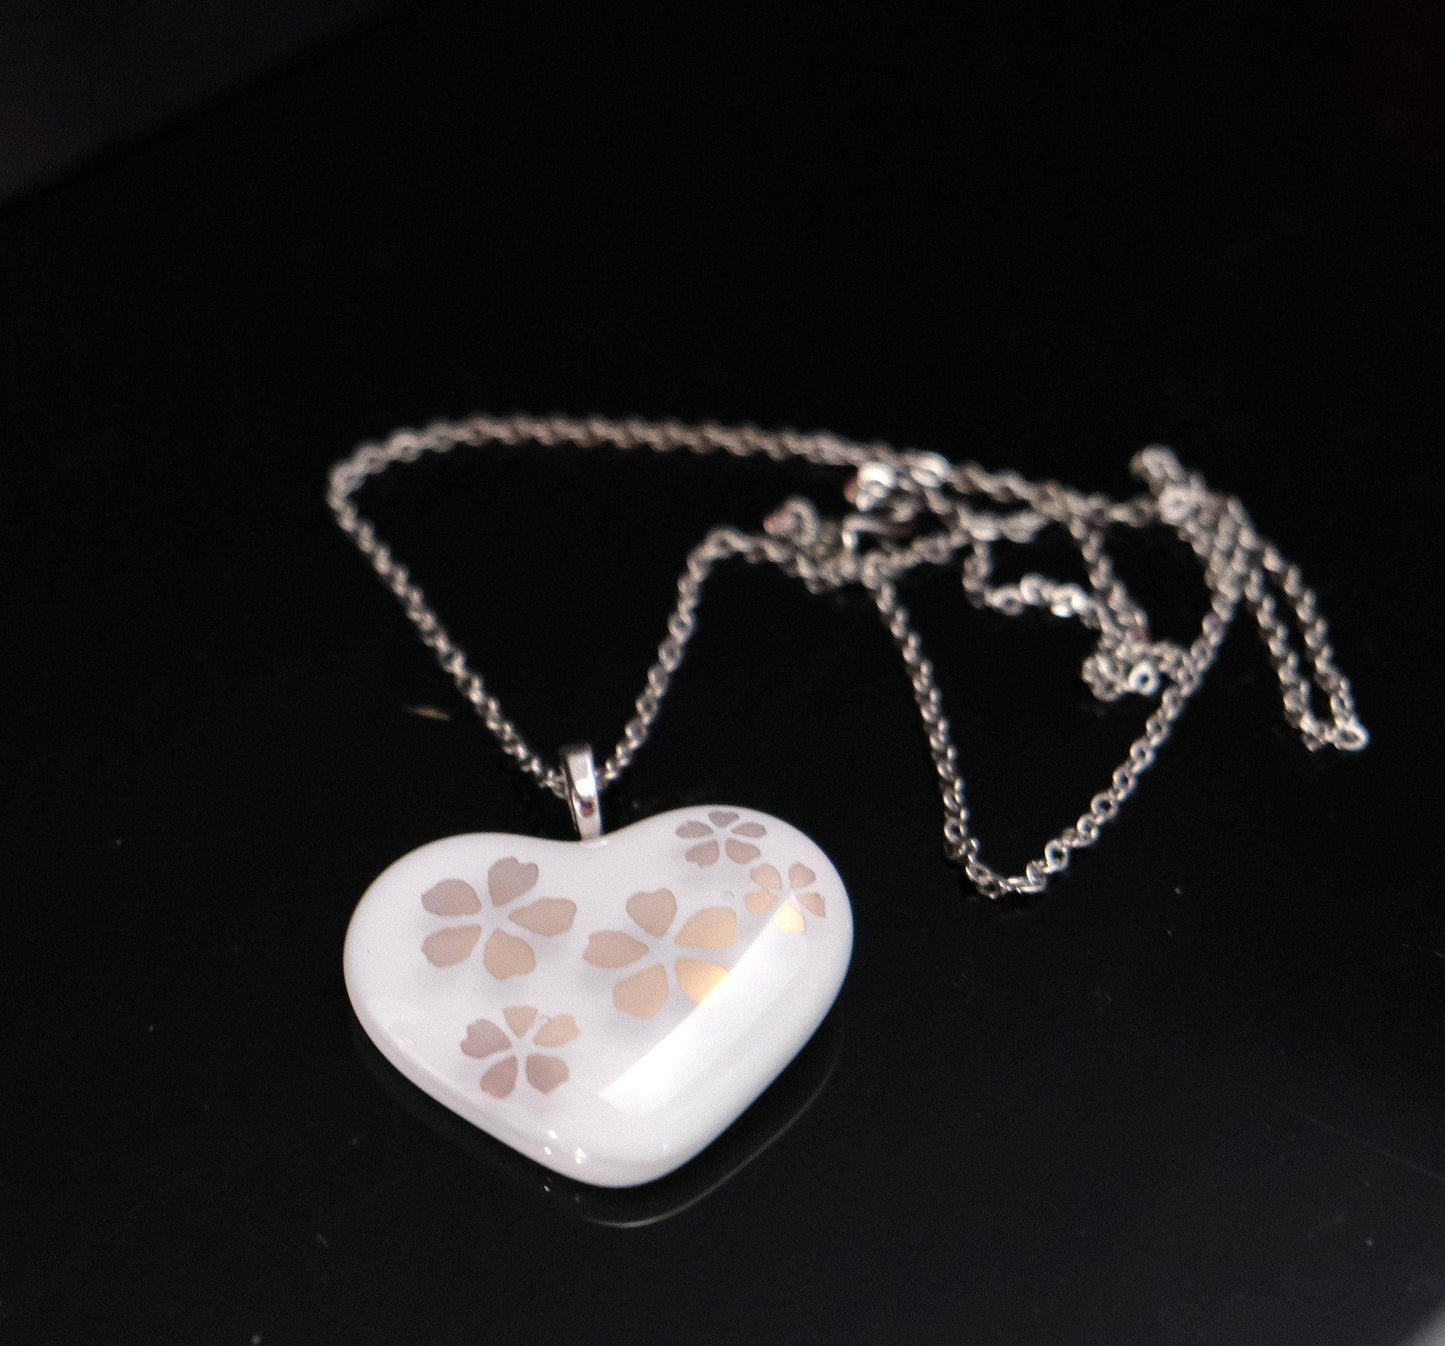 White Fused Glass Heart with Goldish flowers Pendant necklace on 20 inch stainless steel chain seeds glassworks seedsglassworks